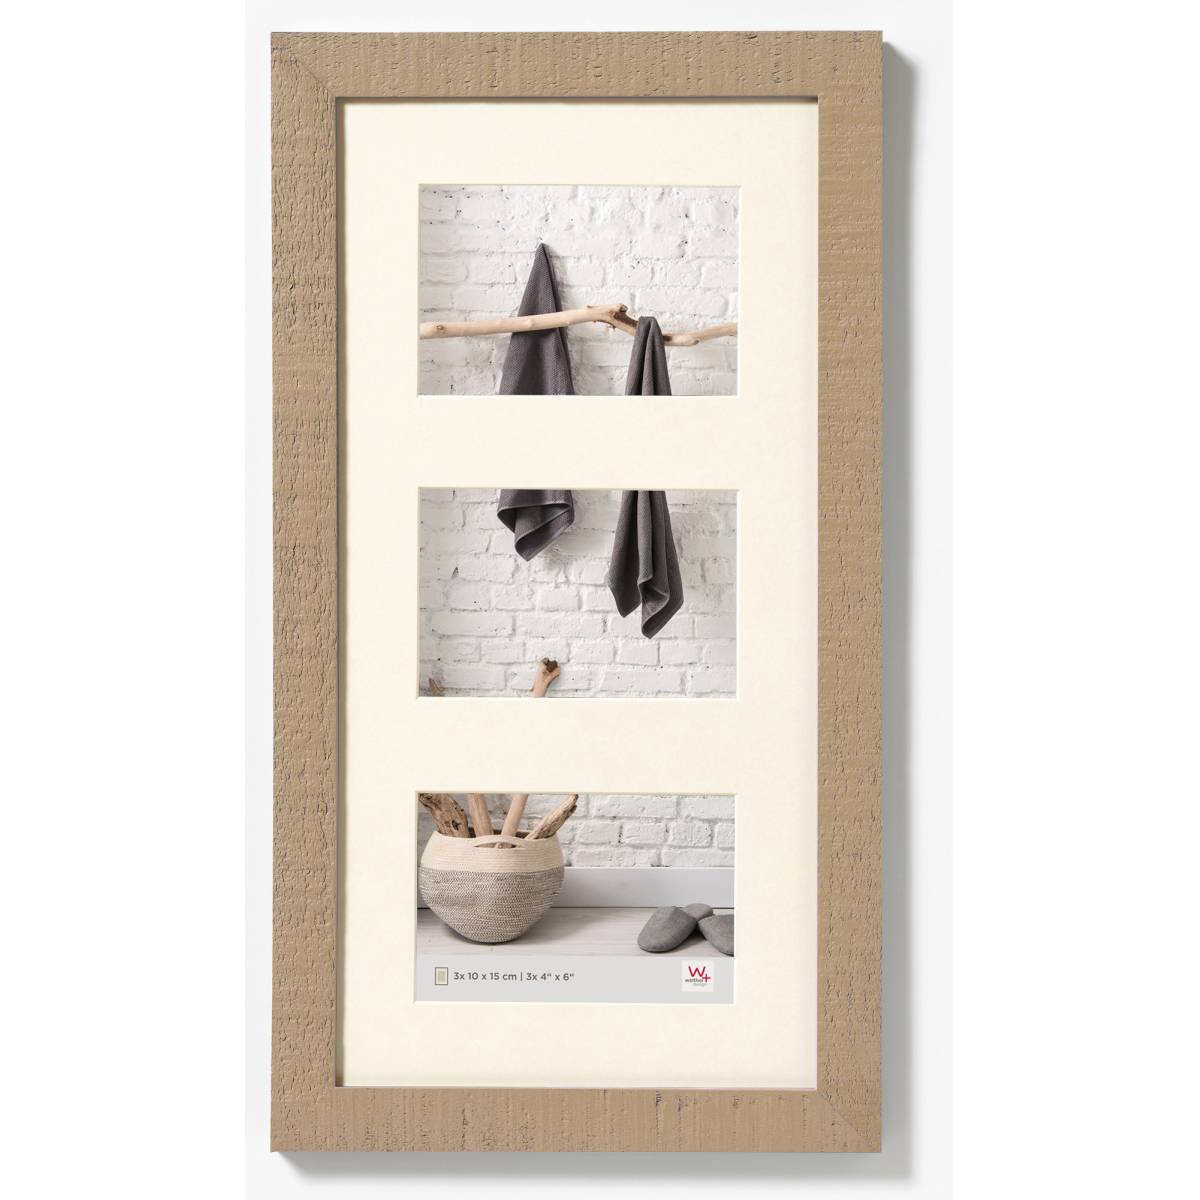 Walther Home Wooden Picture Frame for 3x 6x4 - Beige Brown